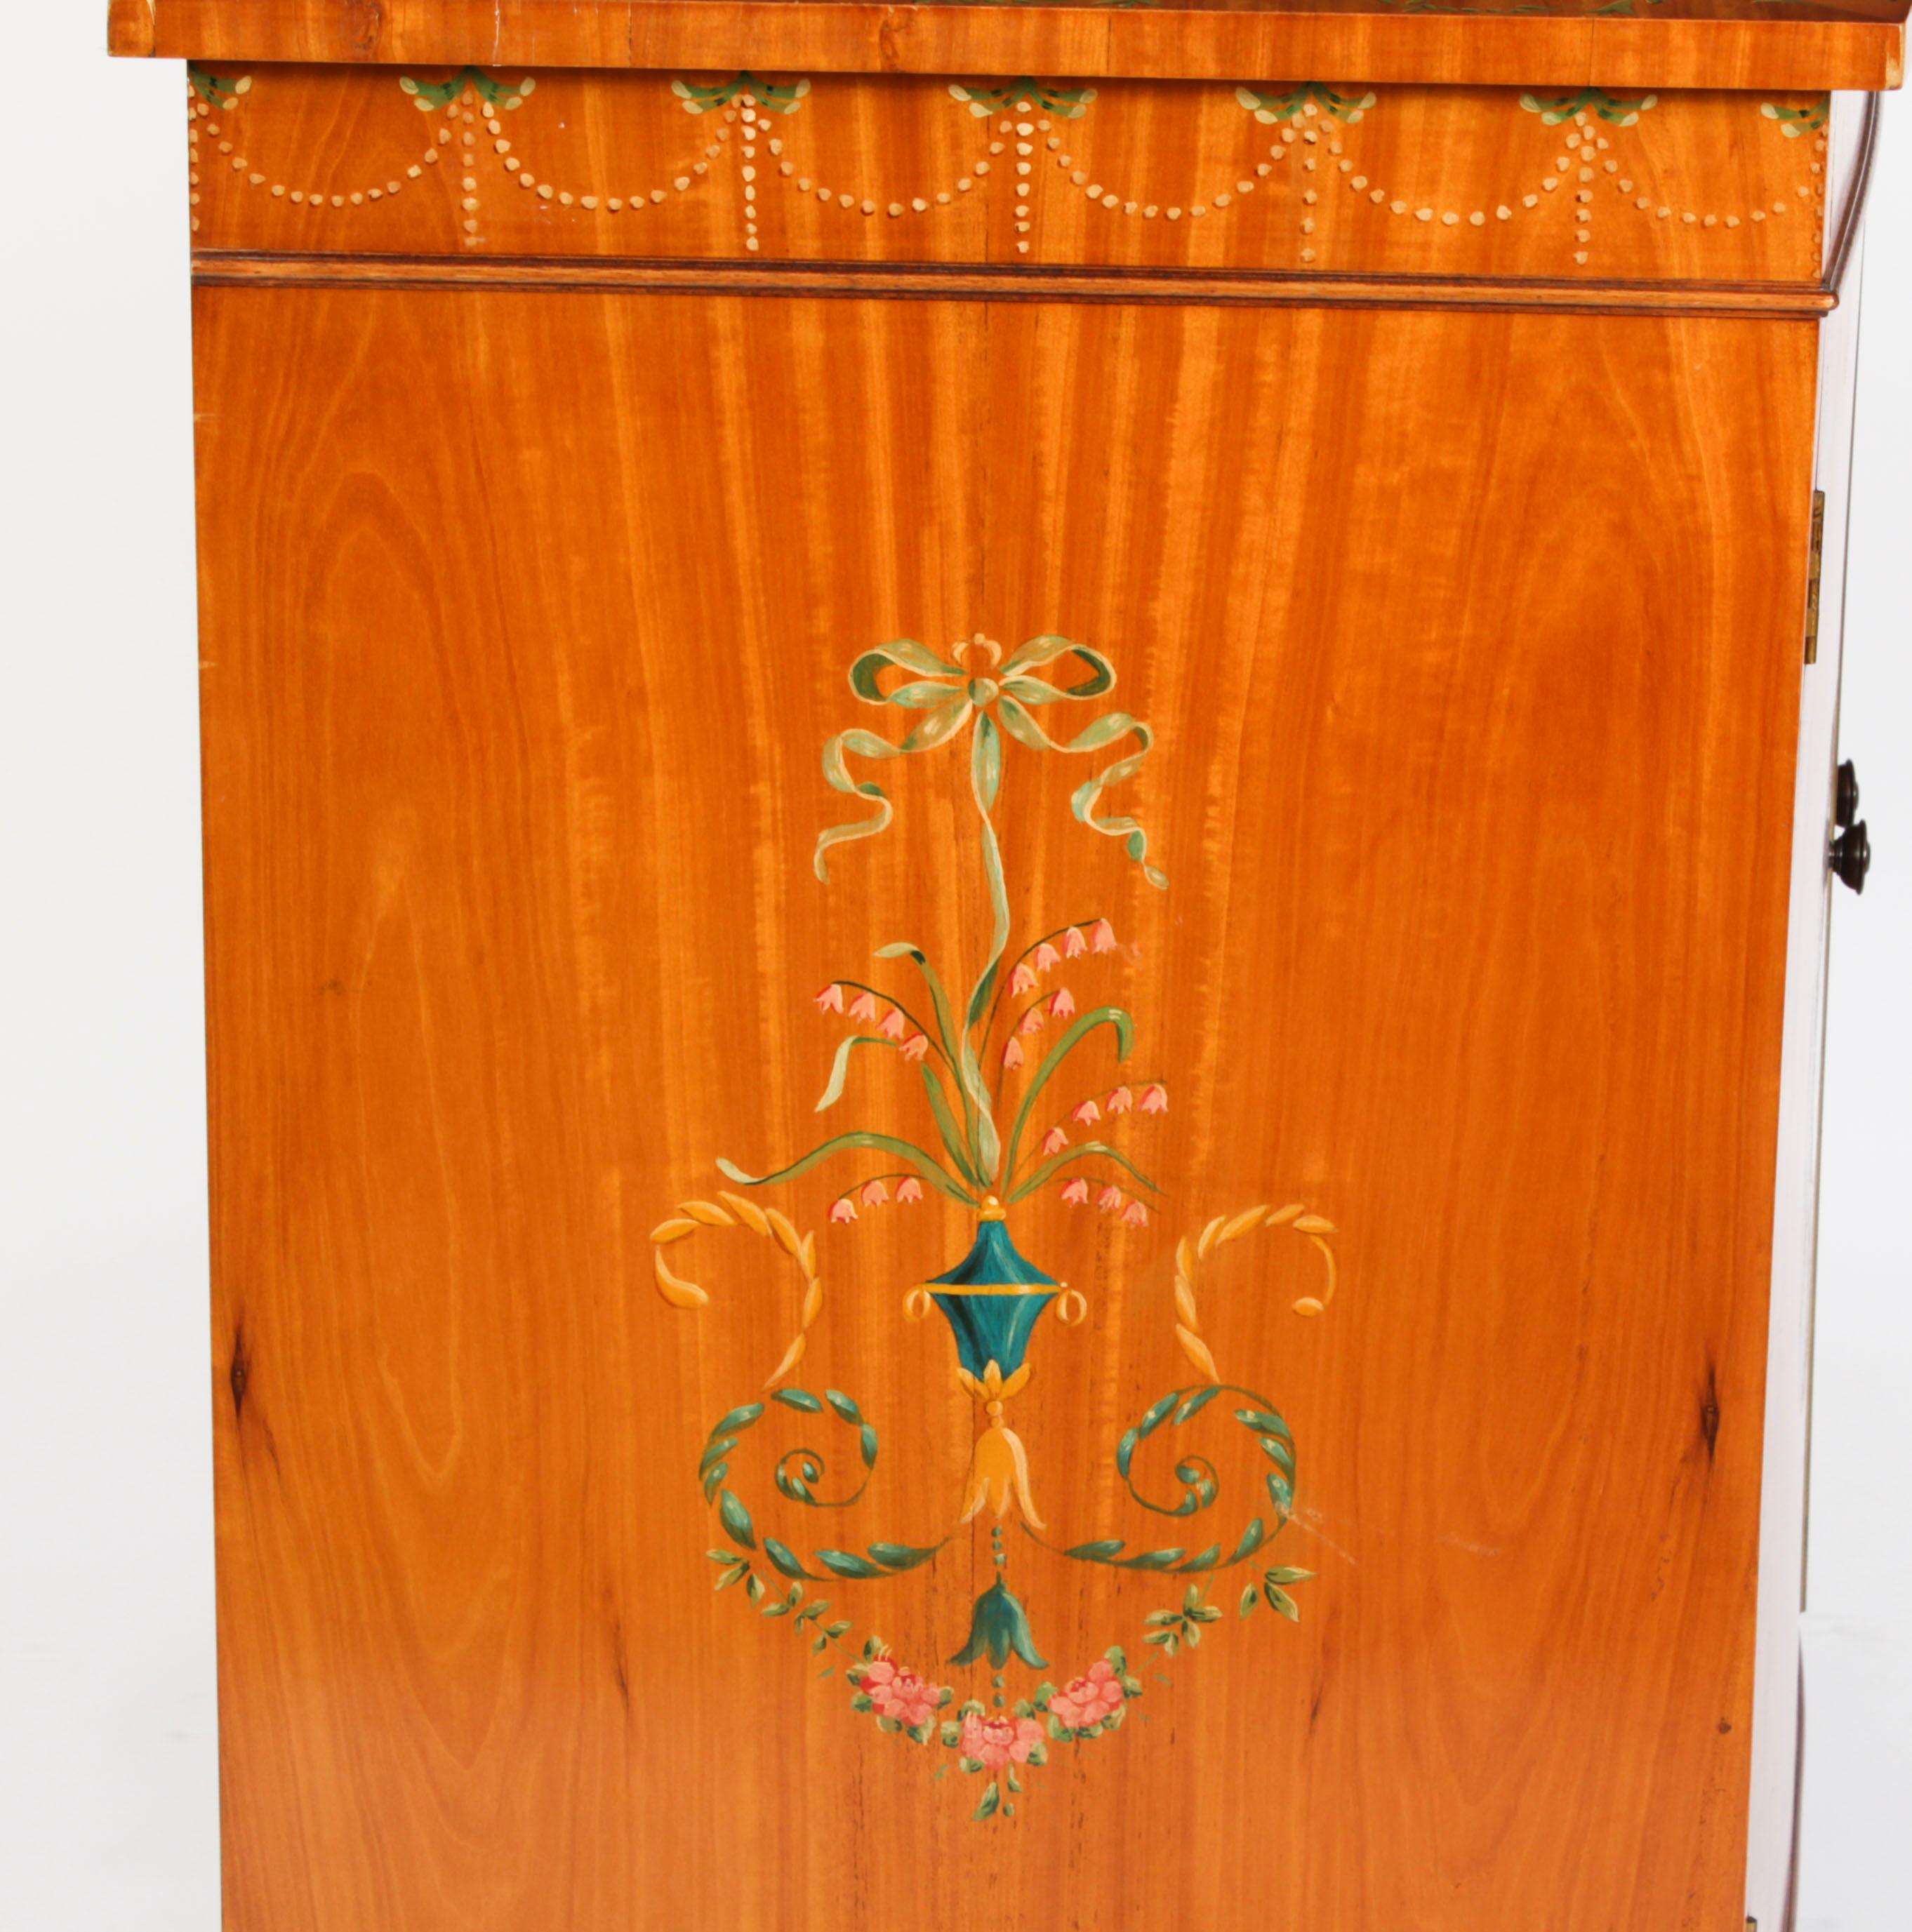 Antique Edwardian Satinwood Hand-Painted Bowfront Side Cabinet, 19th Century 13